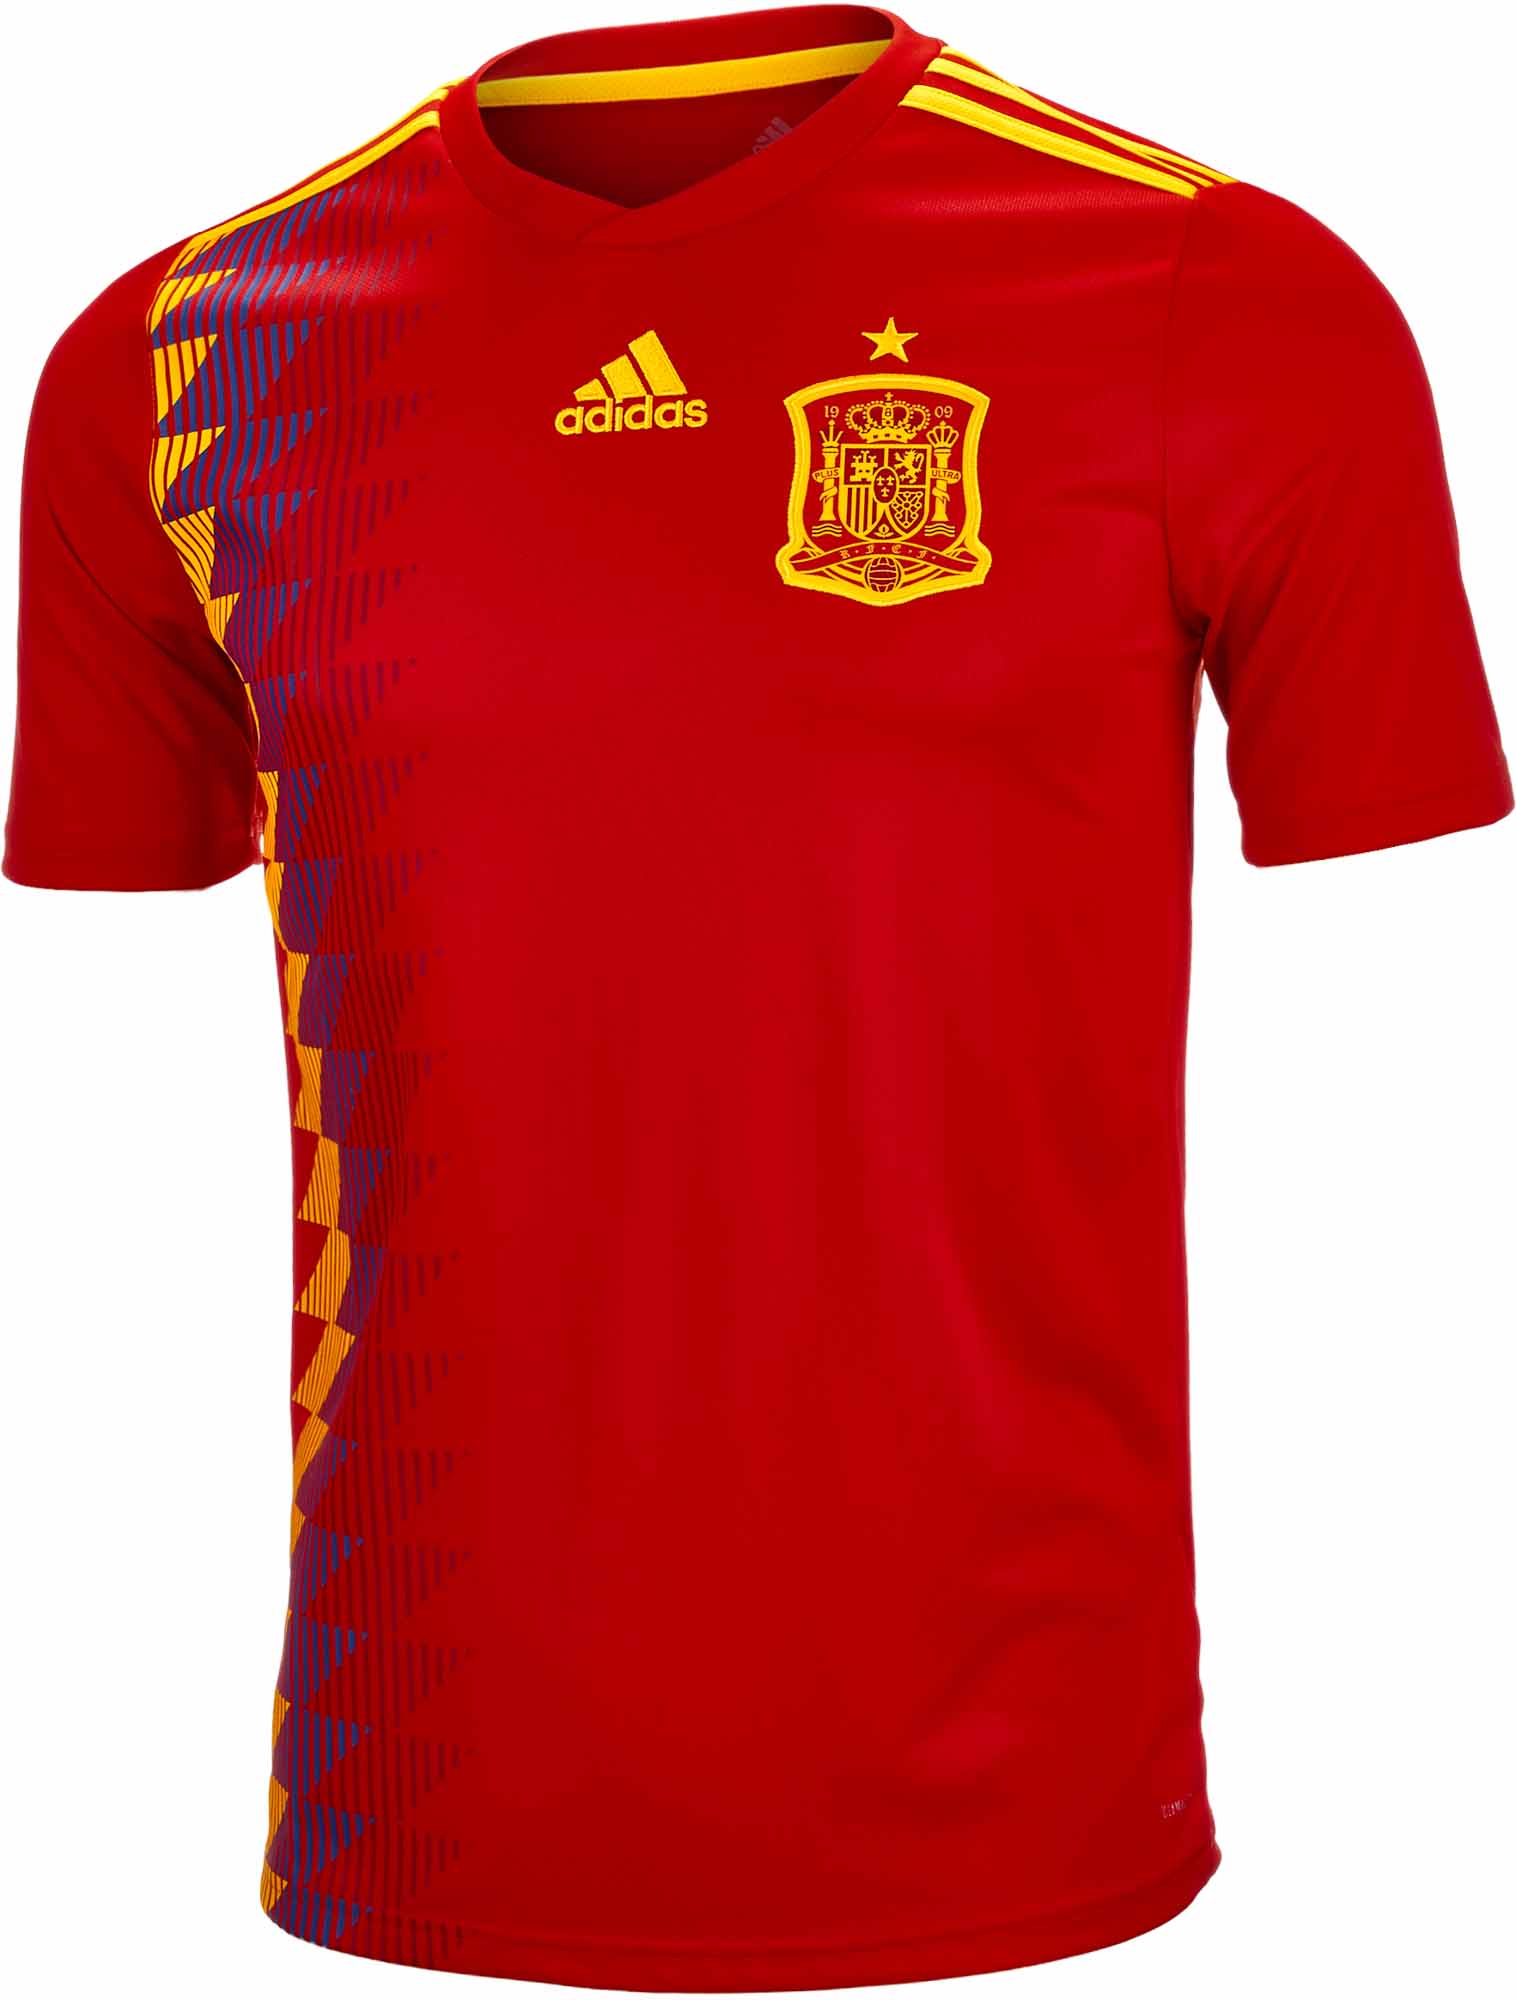 adidas Spain Home Jersey 2018-19